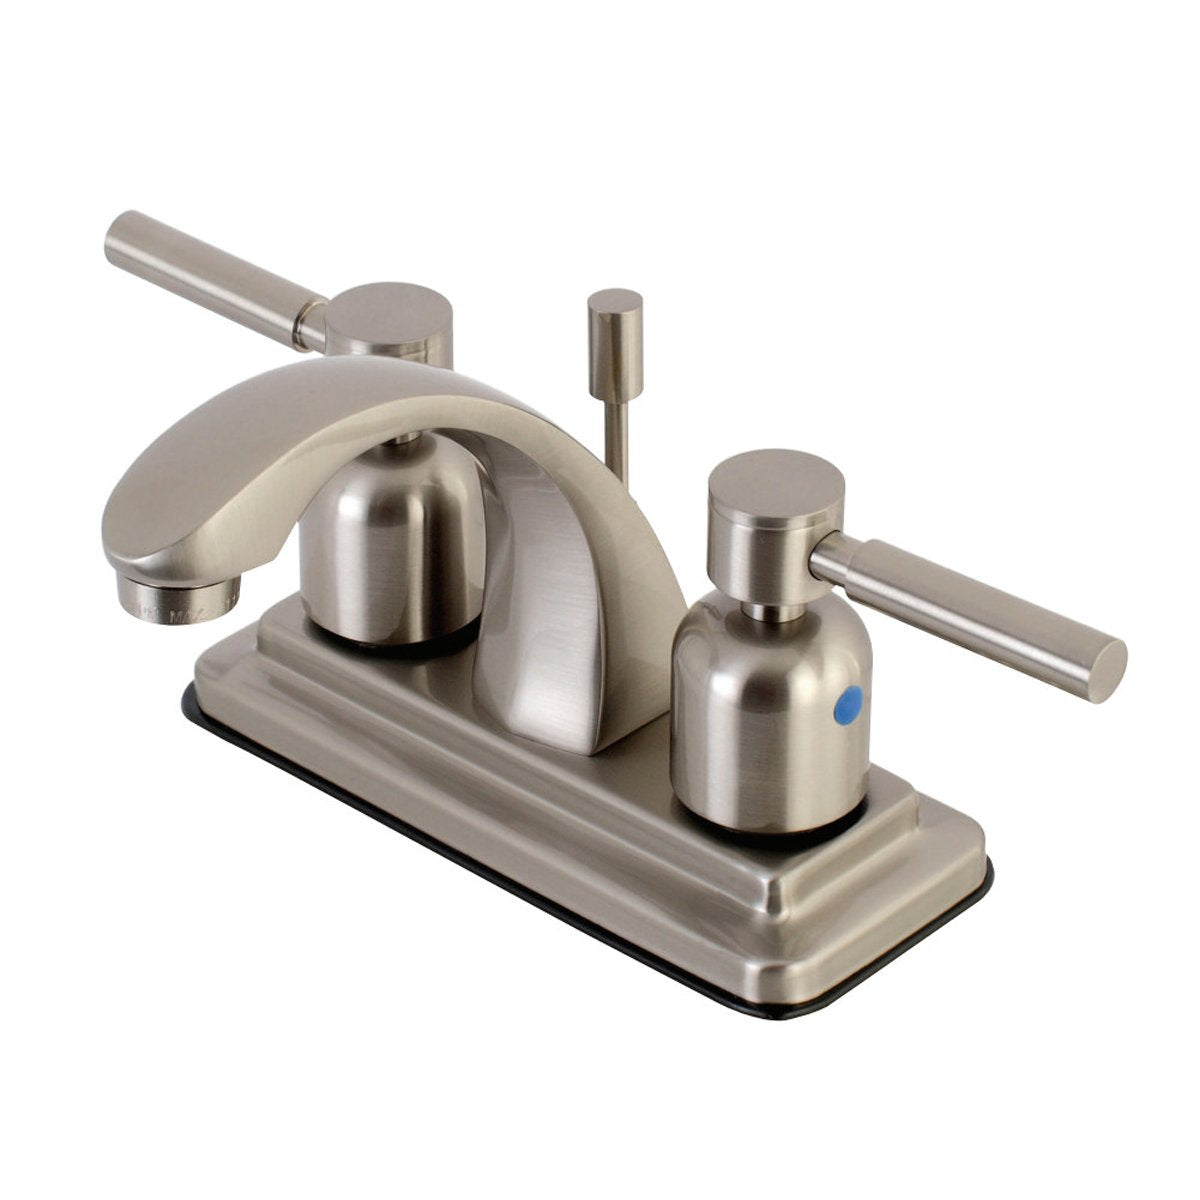 Kingston Brass Concord 4-Inch Centerset Bathroom Faucet with Pop-Up Drain